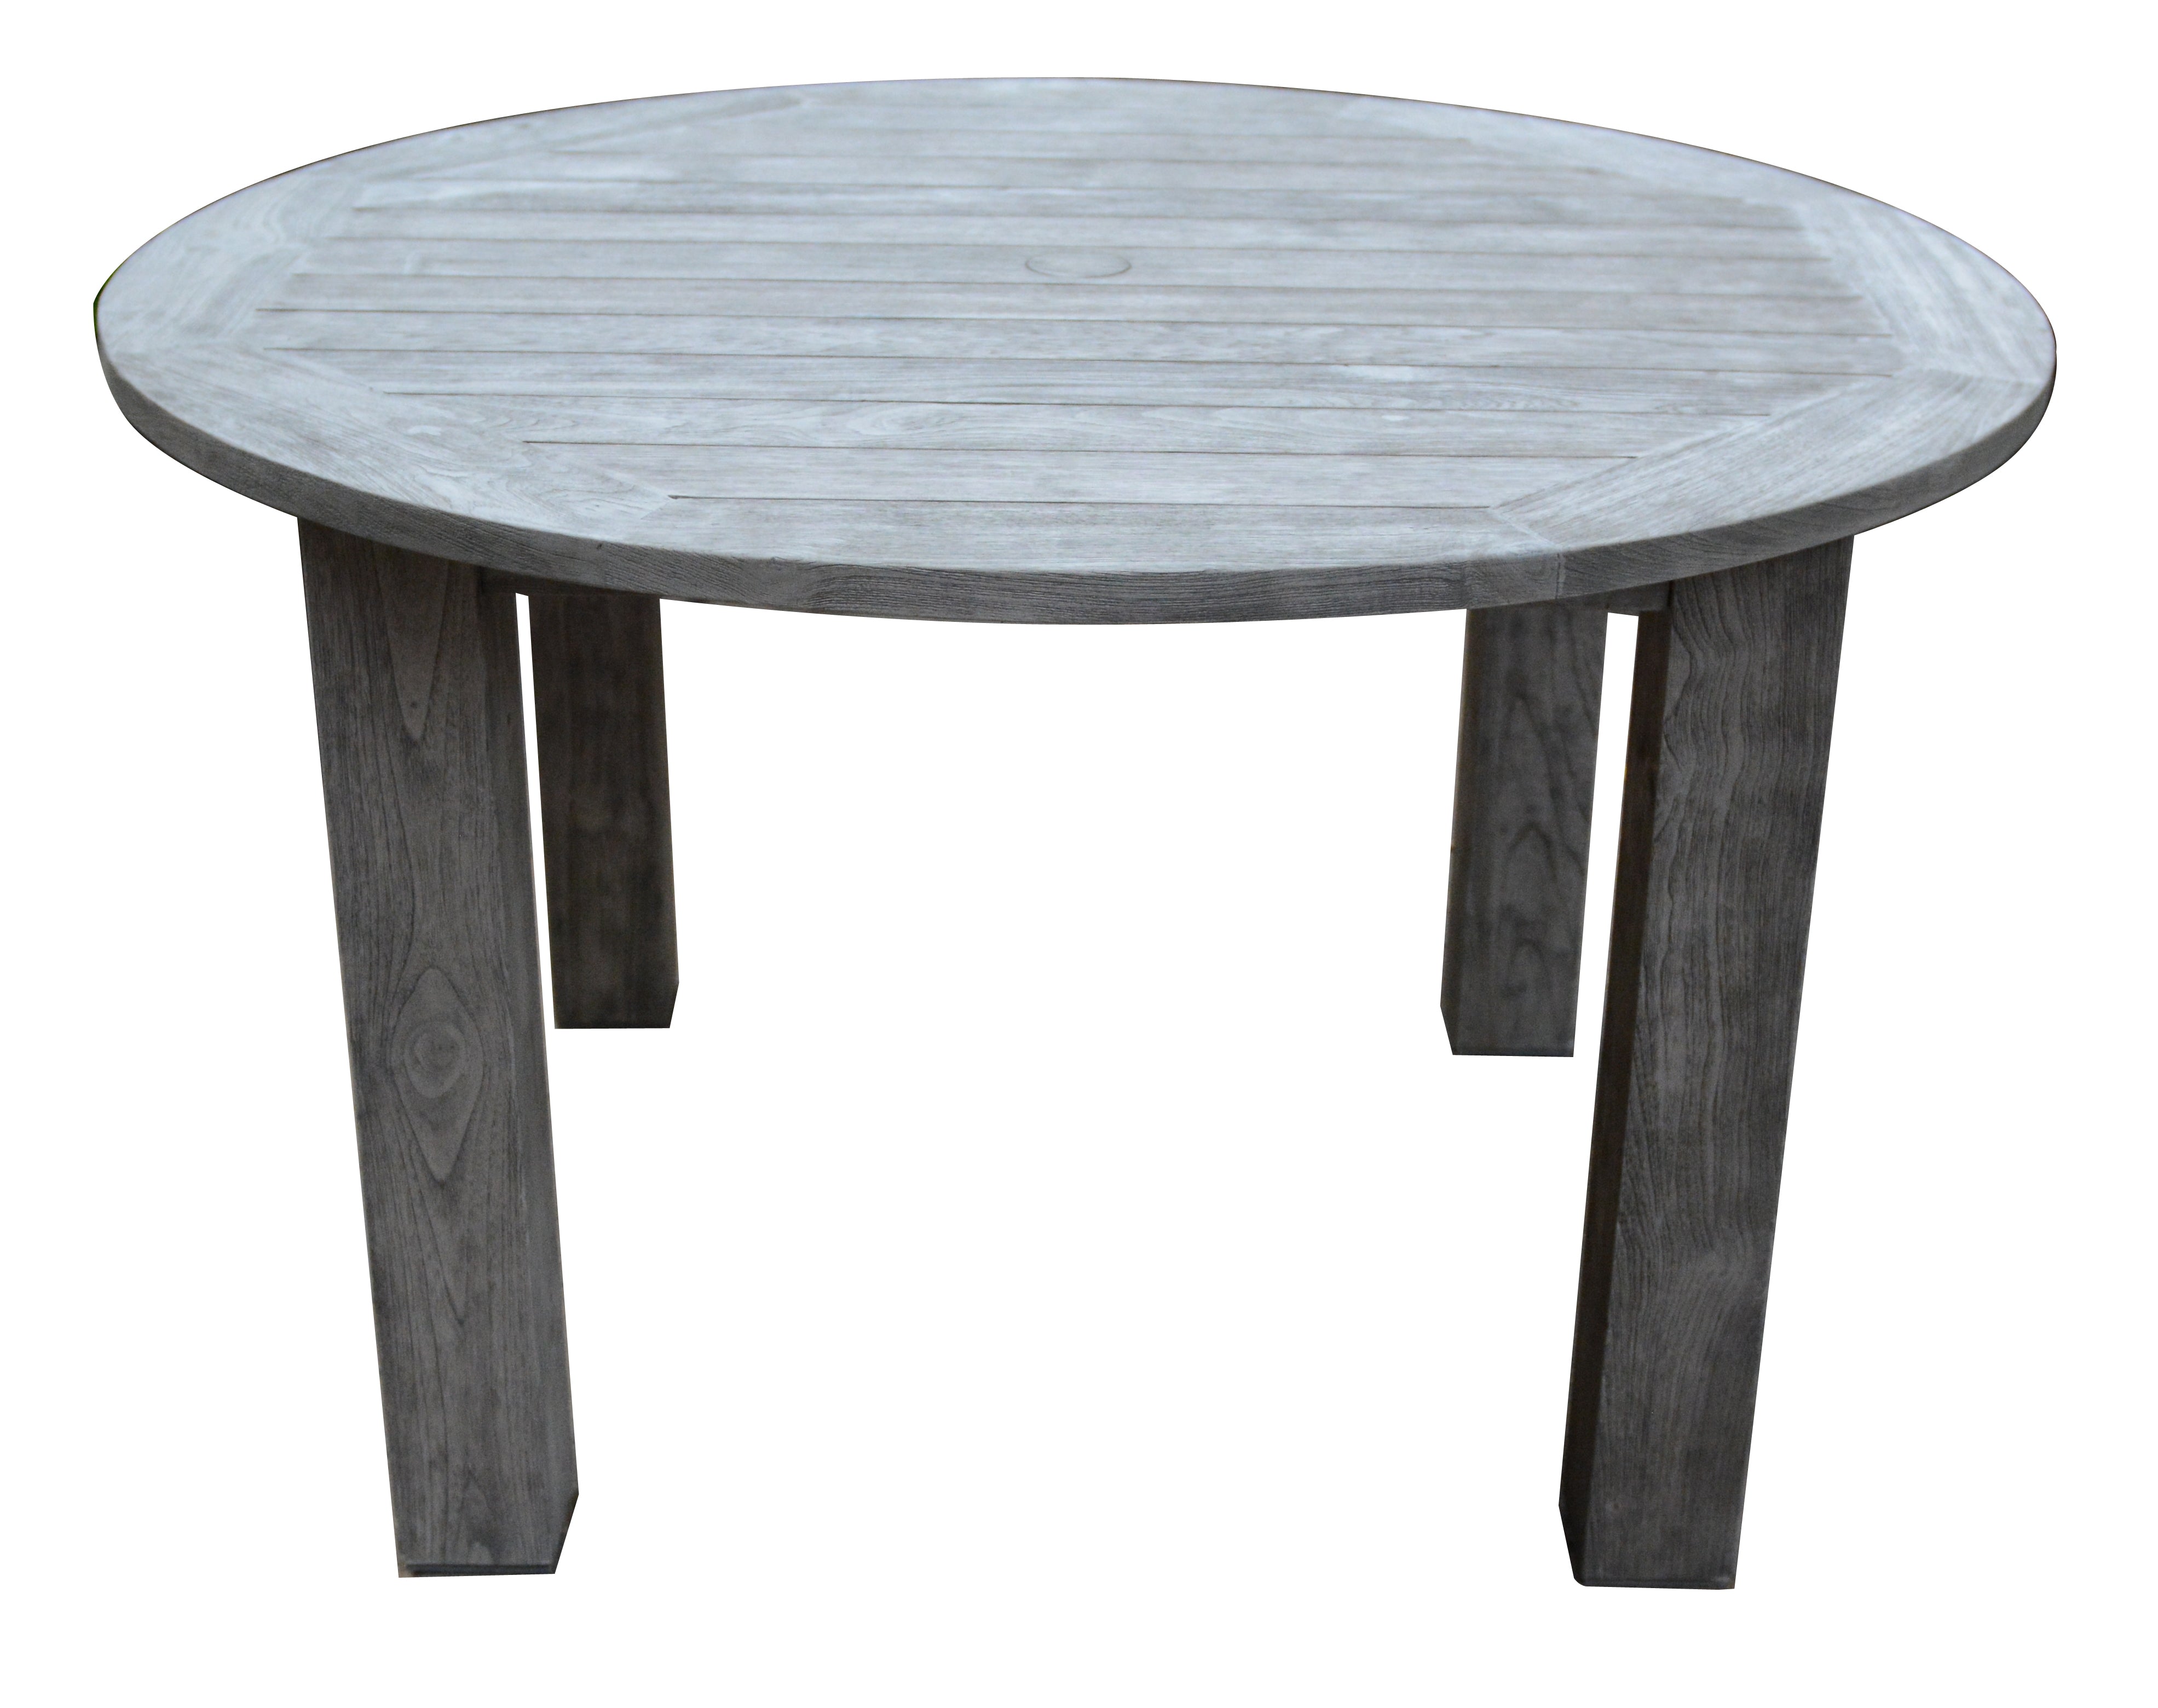 Shelburne 50" Round Dining Table